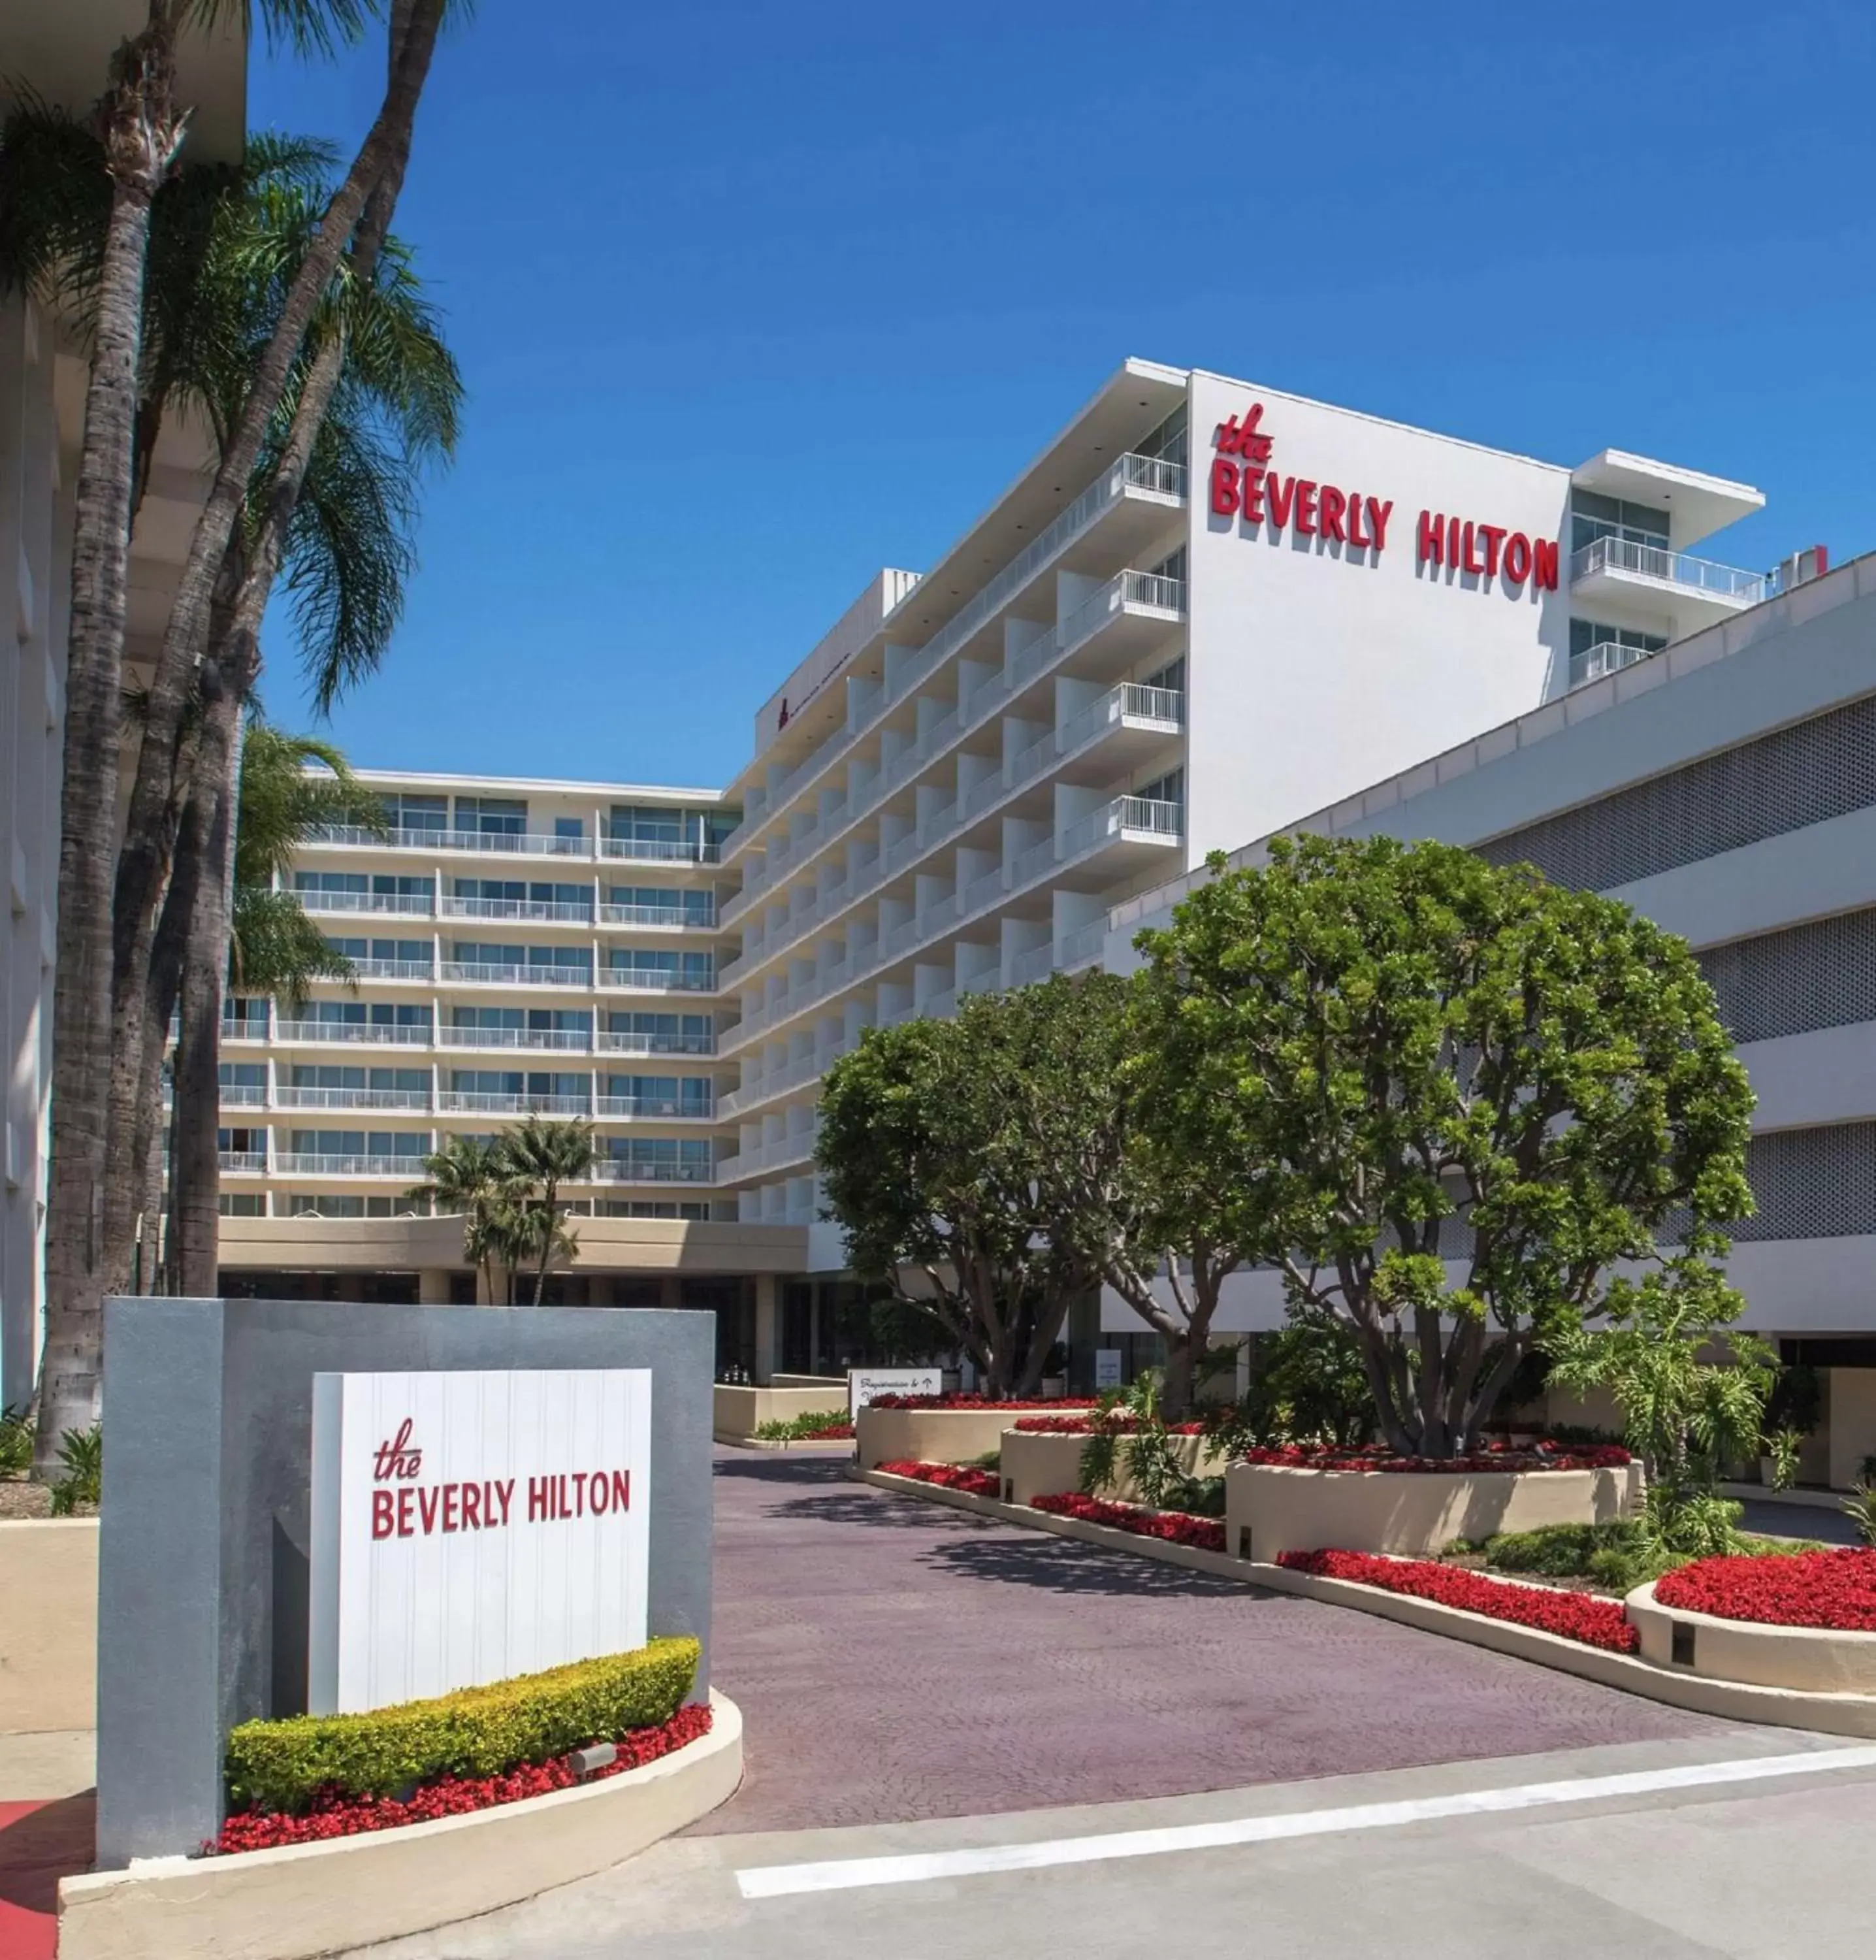 Property Building in The Beverly Hilton